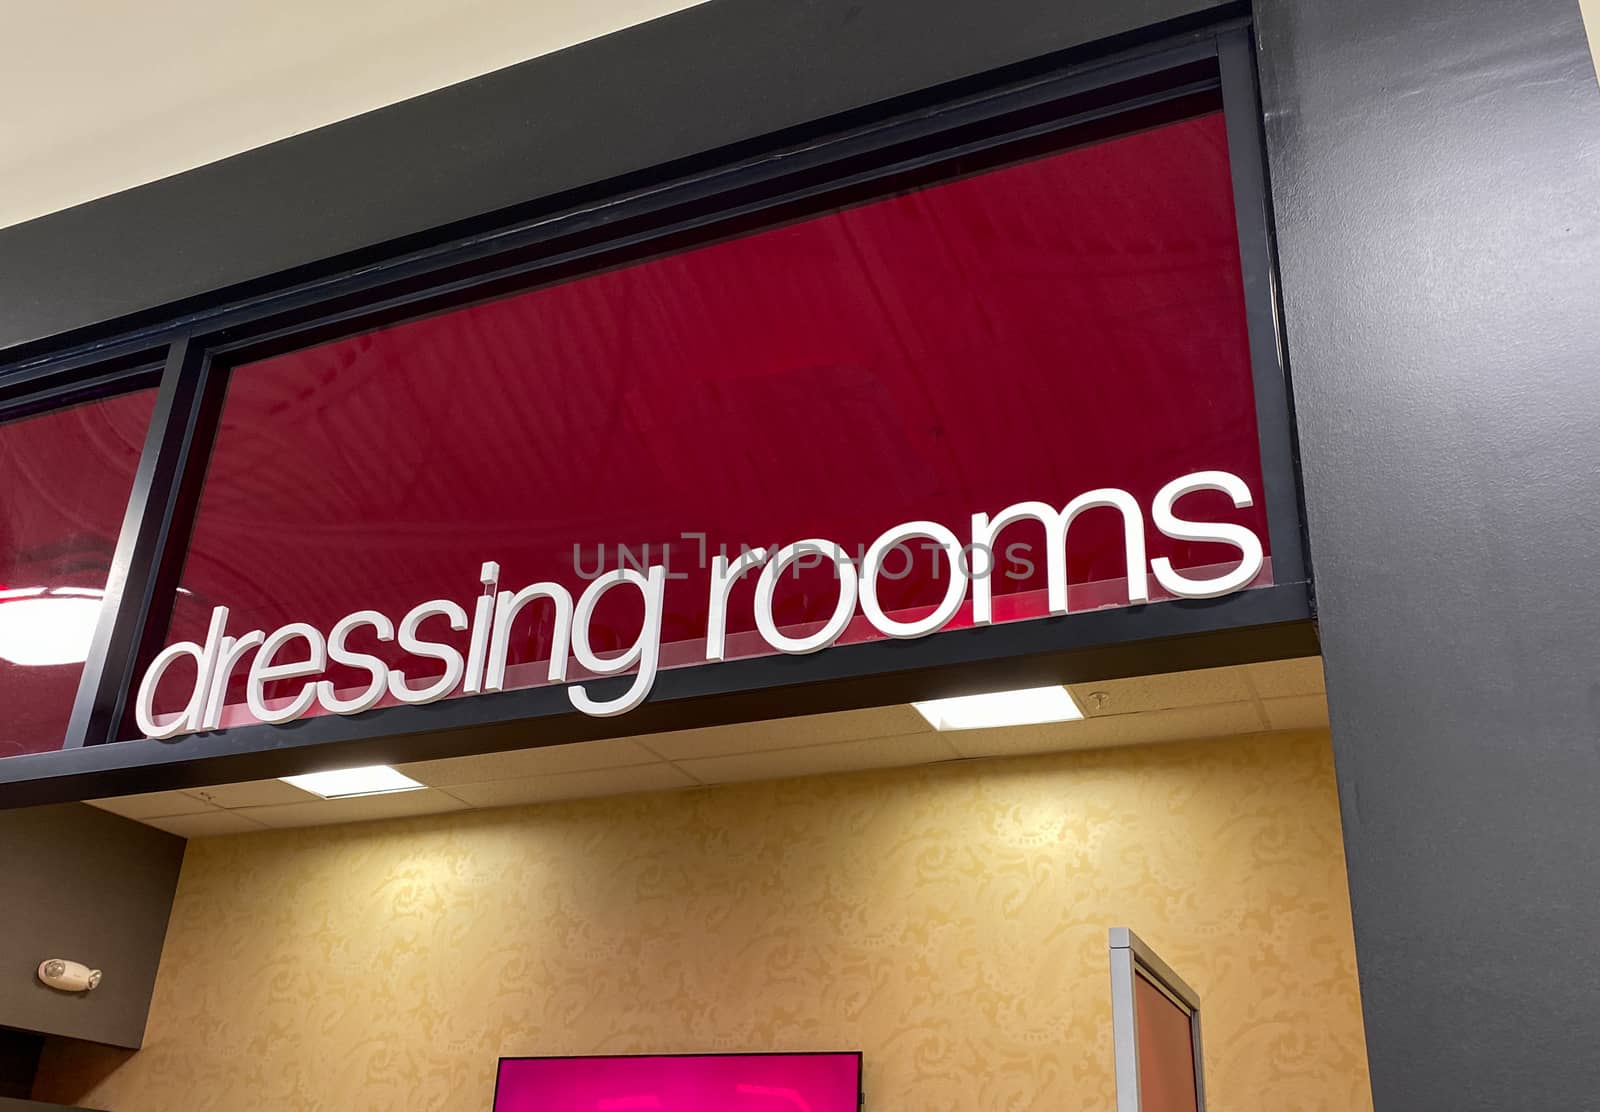 The dressing room sign with white letters on a red background at a retail clothing store.